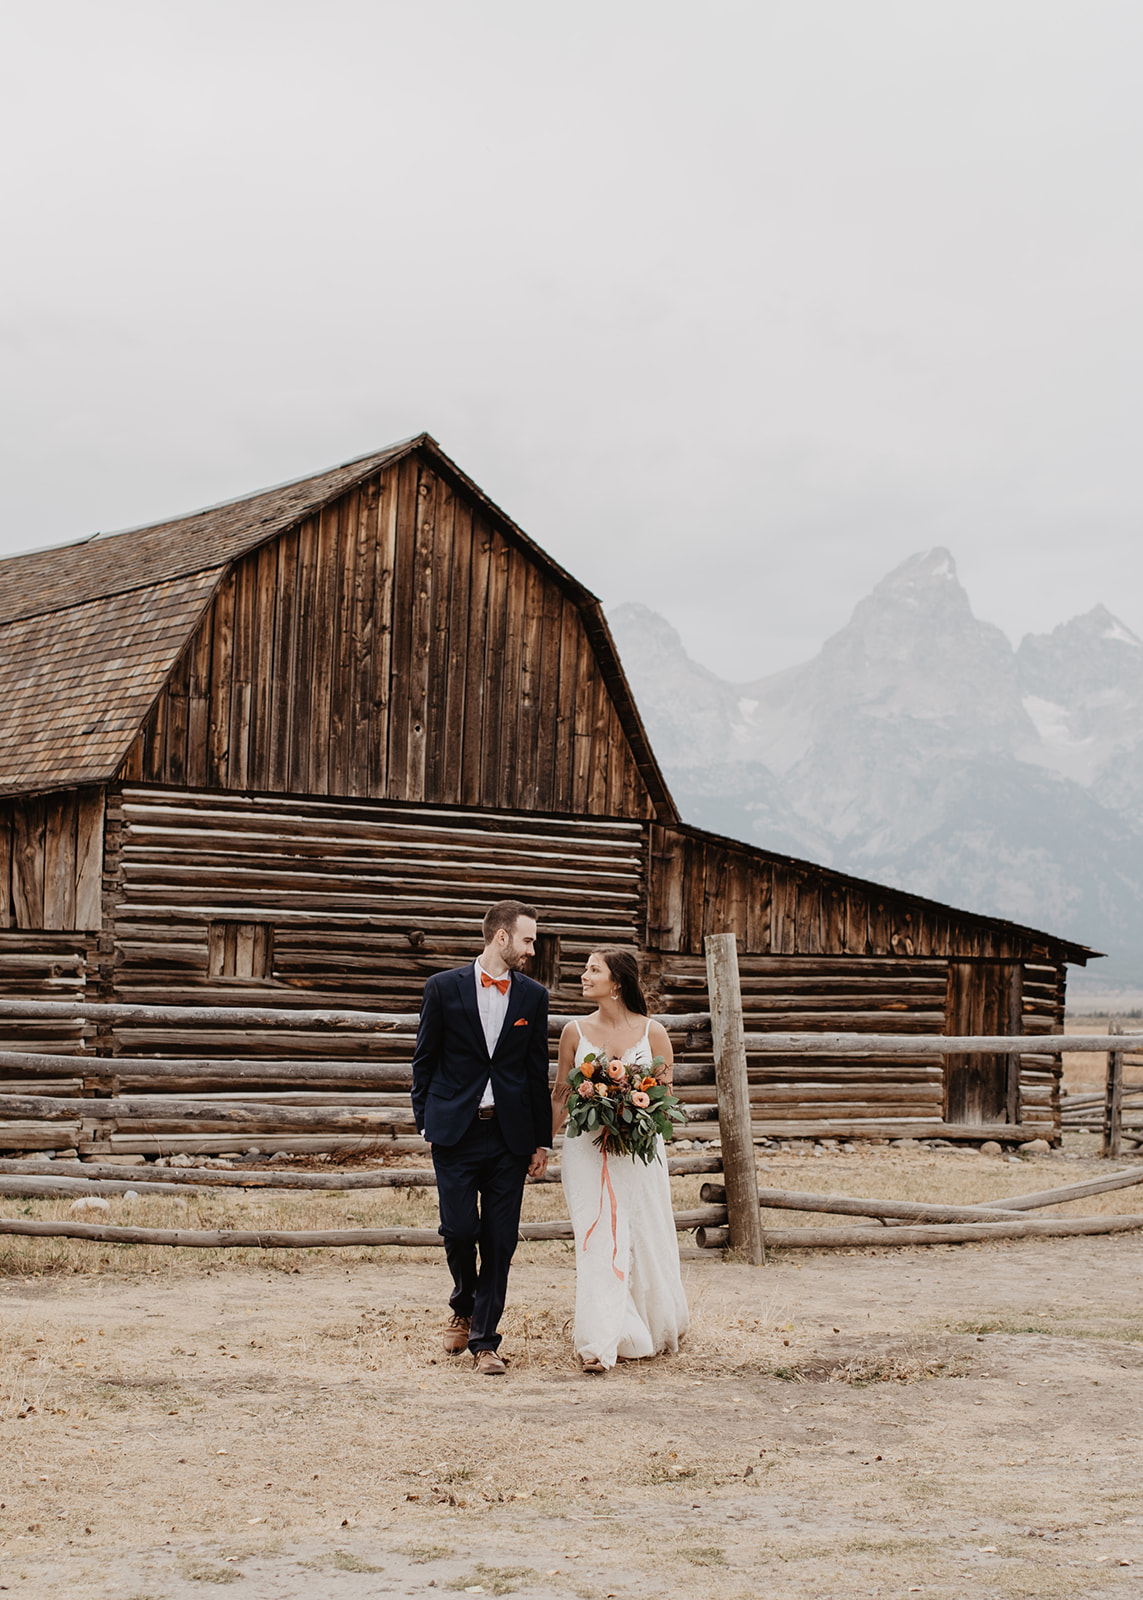 Best venues for weddings in Jackson Hole with bride and groom walking fron an old rustic barn to the camera and smiling at one anothe rin Jackson Hole at Mormon Row